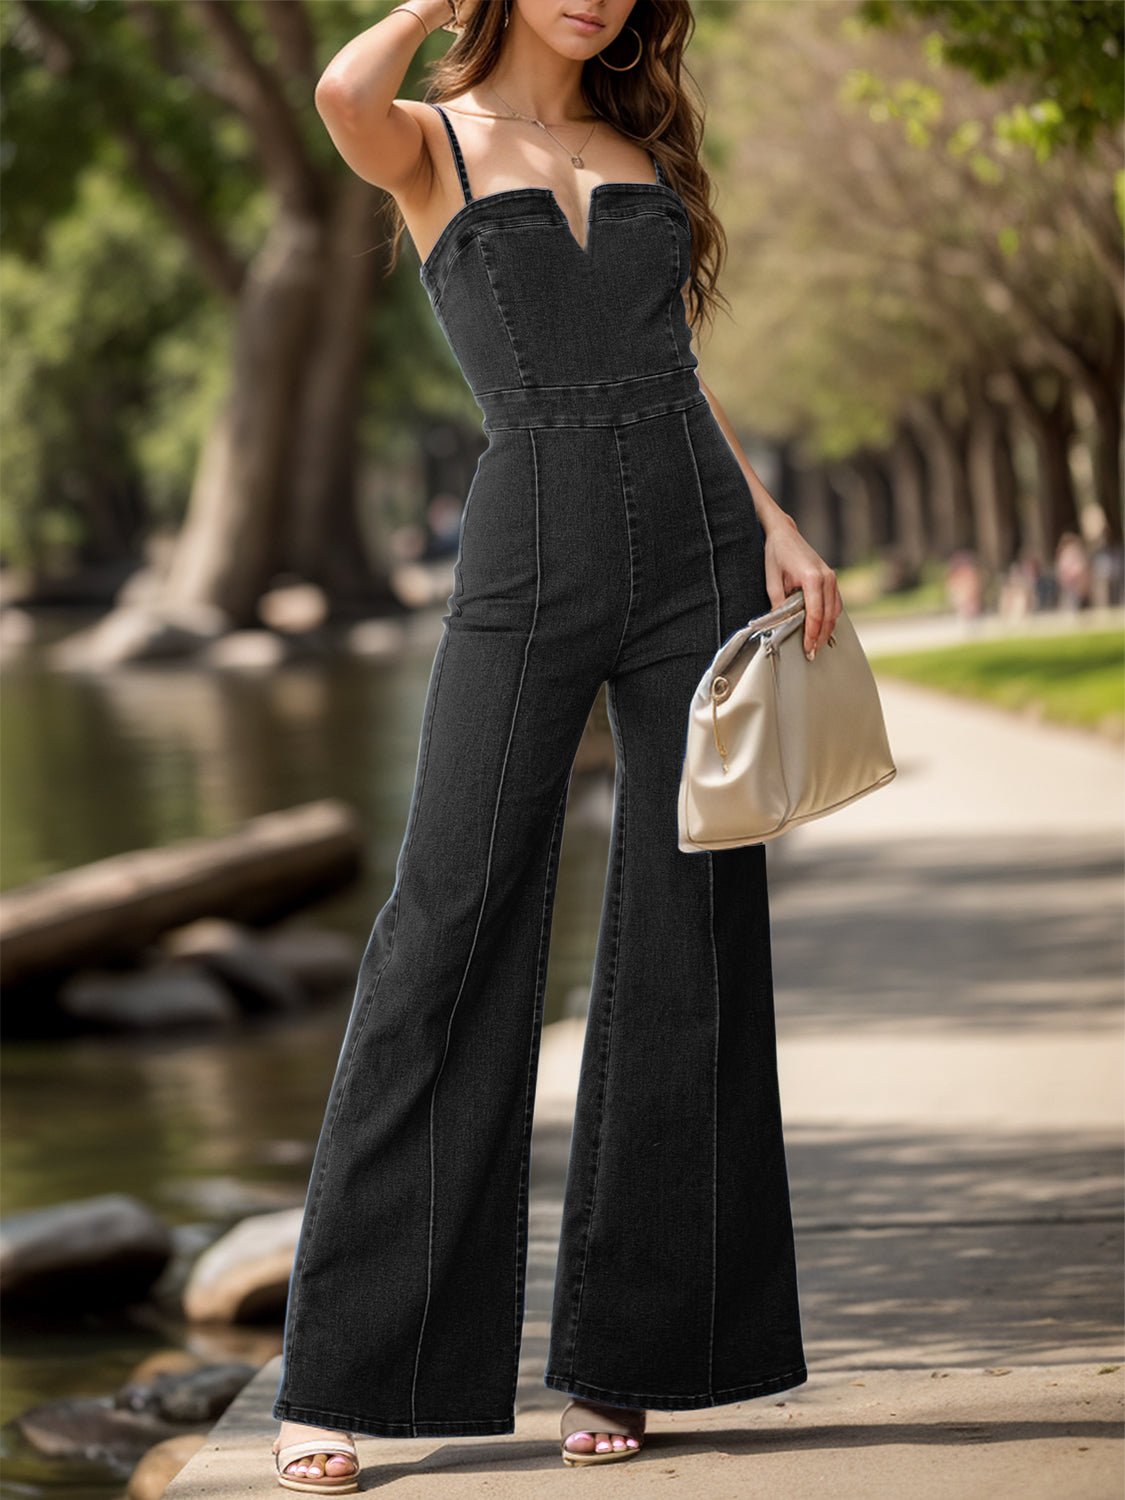 Two images of a woman wearing chic flared denim overalls: one in black and one in blue. Each paired with a white top, she is walking along a tree-lined path, accessorized with a necklace and carrying a cream handbag.